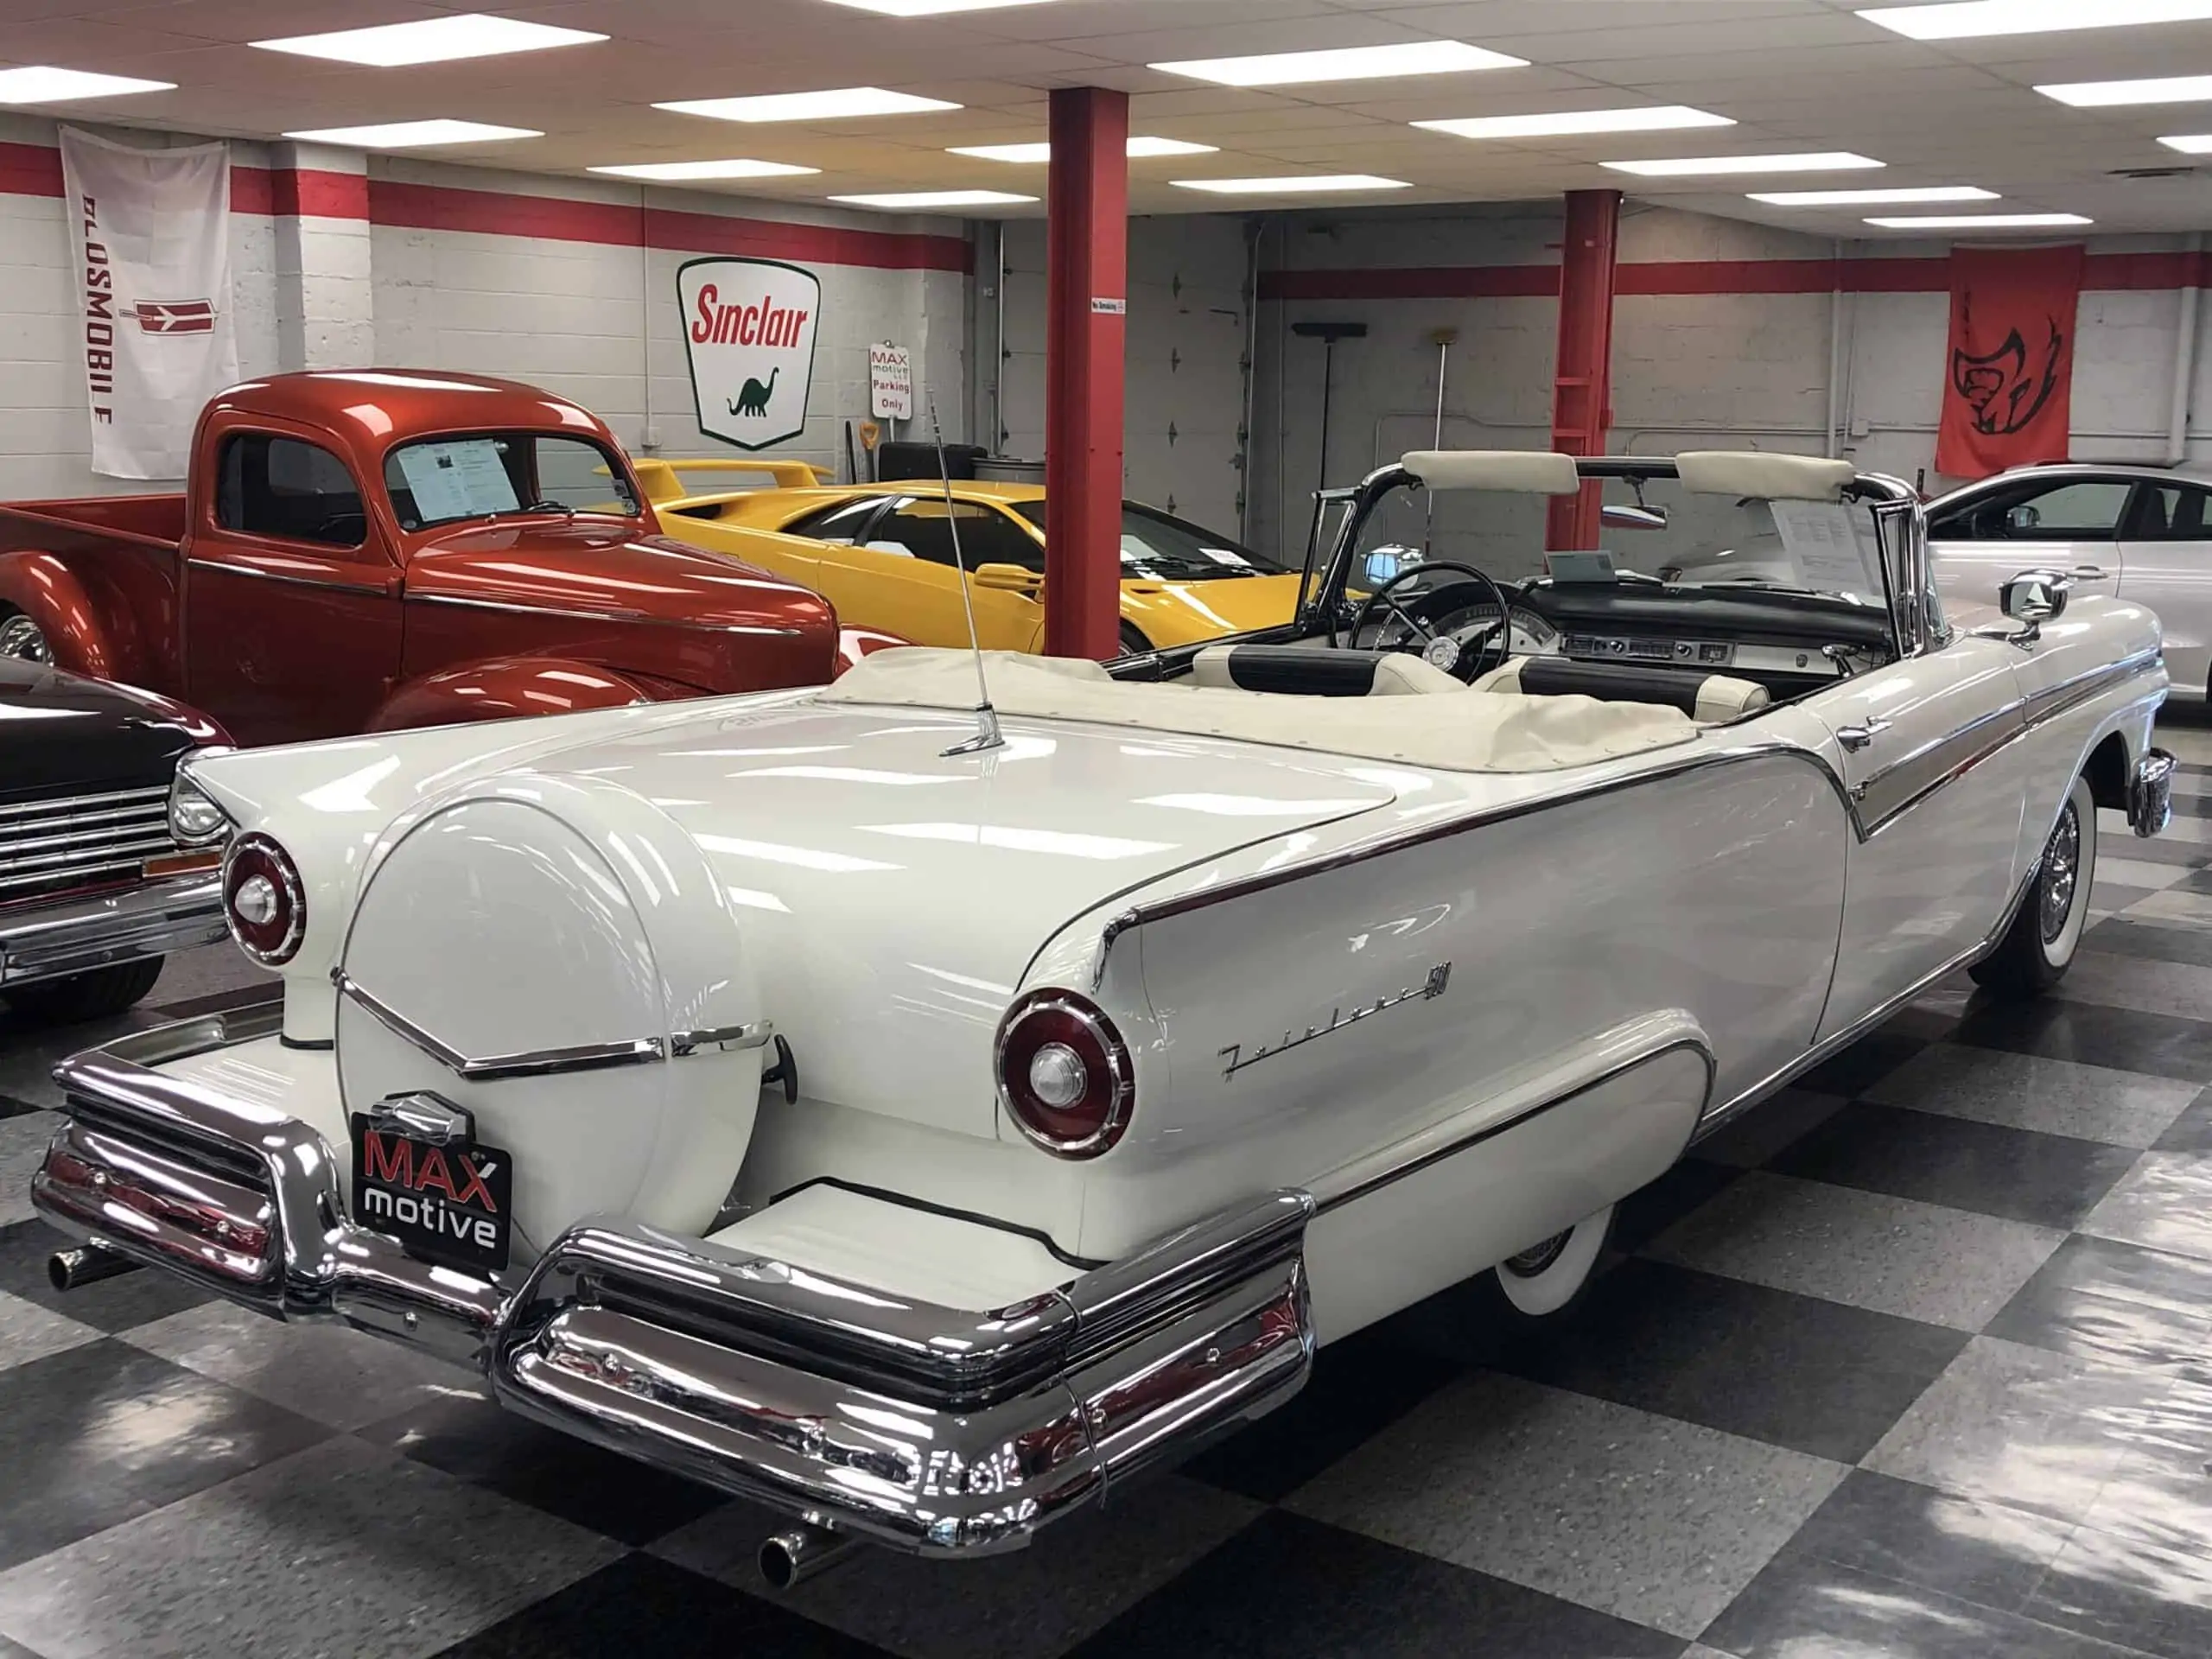 Part Of What Made The 50’S Fabulous Were Great Cars Like This ‘57 Fairlane Convertible. The Big Fords Were The #1 Seller That Year.